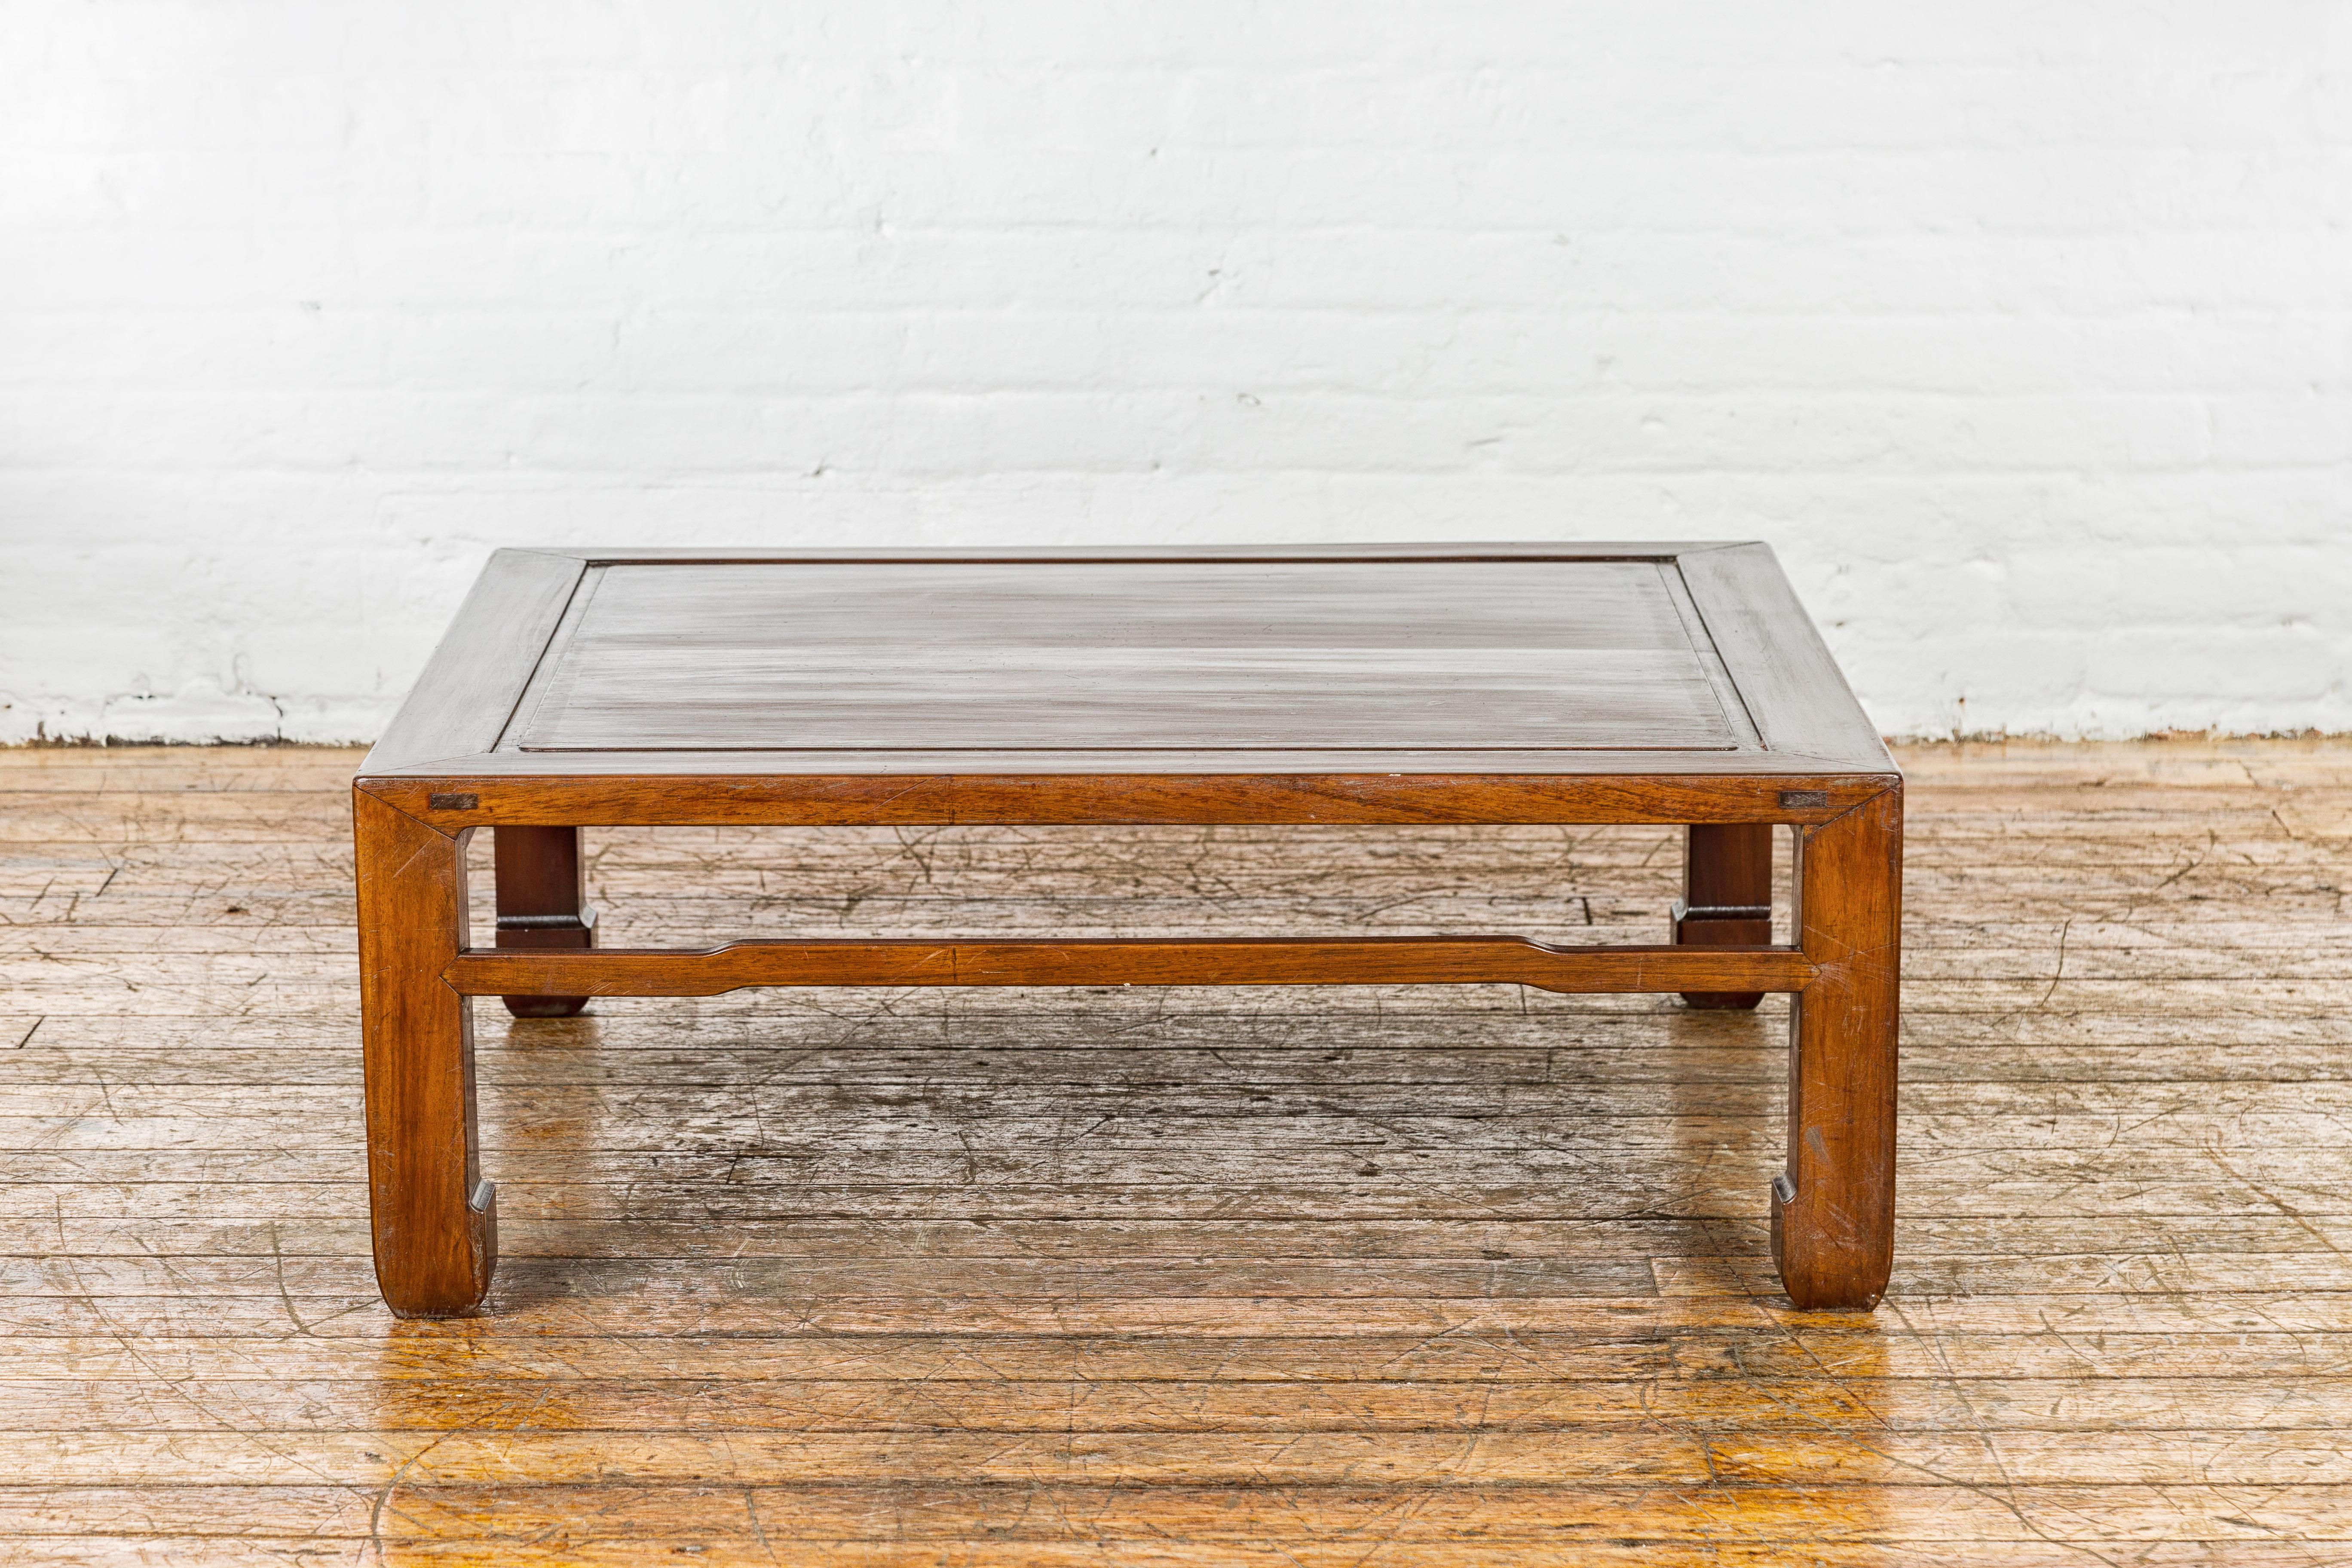 Late Qing Dynasty Square Coffee Table with Horse Hoof Legs and Stretchers For Sale 11